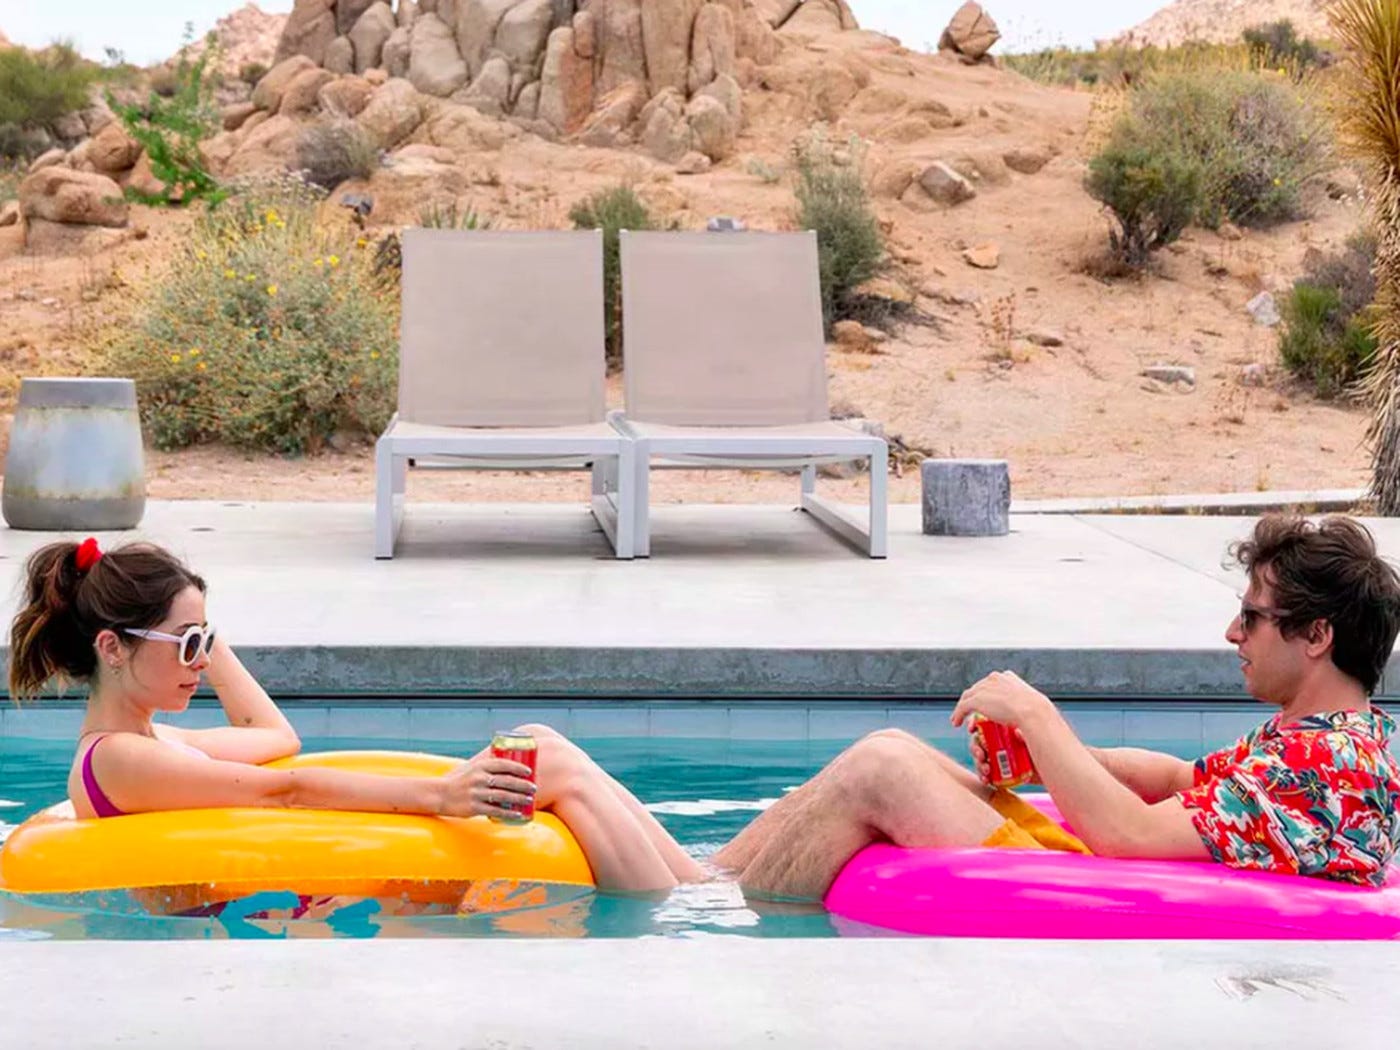 Palm Springs review: the perfect comedy for a world where nothing matters  anymore - The Verge